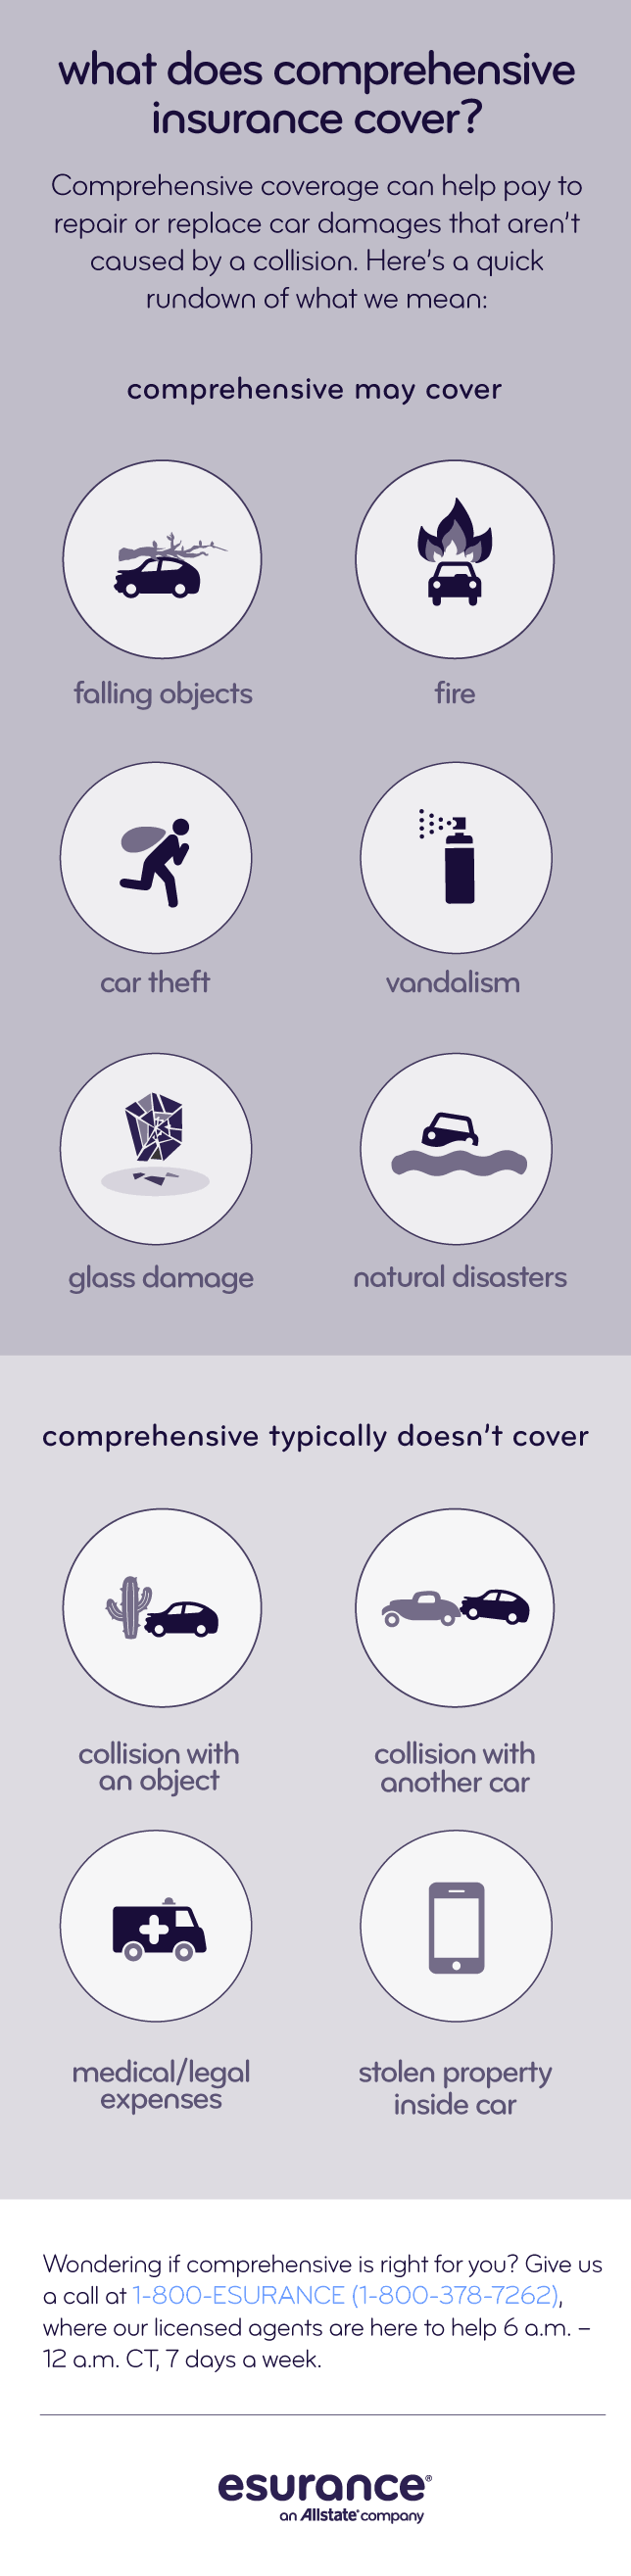 car myths: comprehensive insurance covers everything | esurance